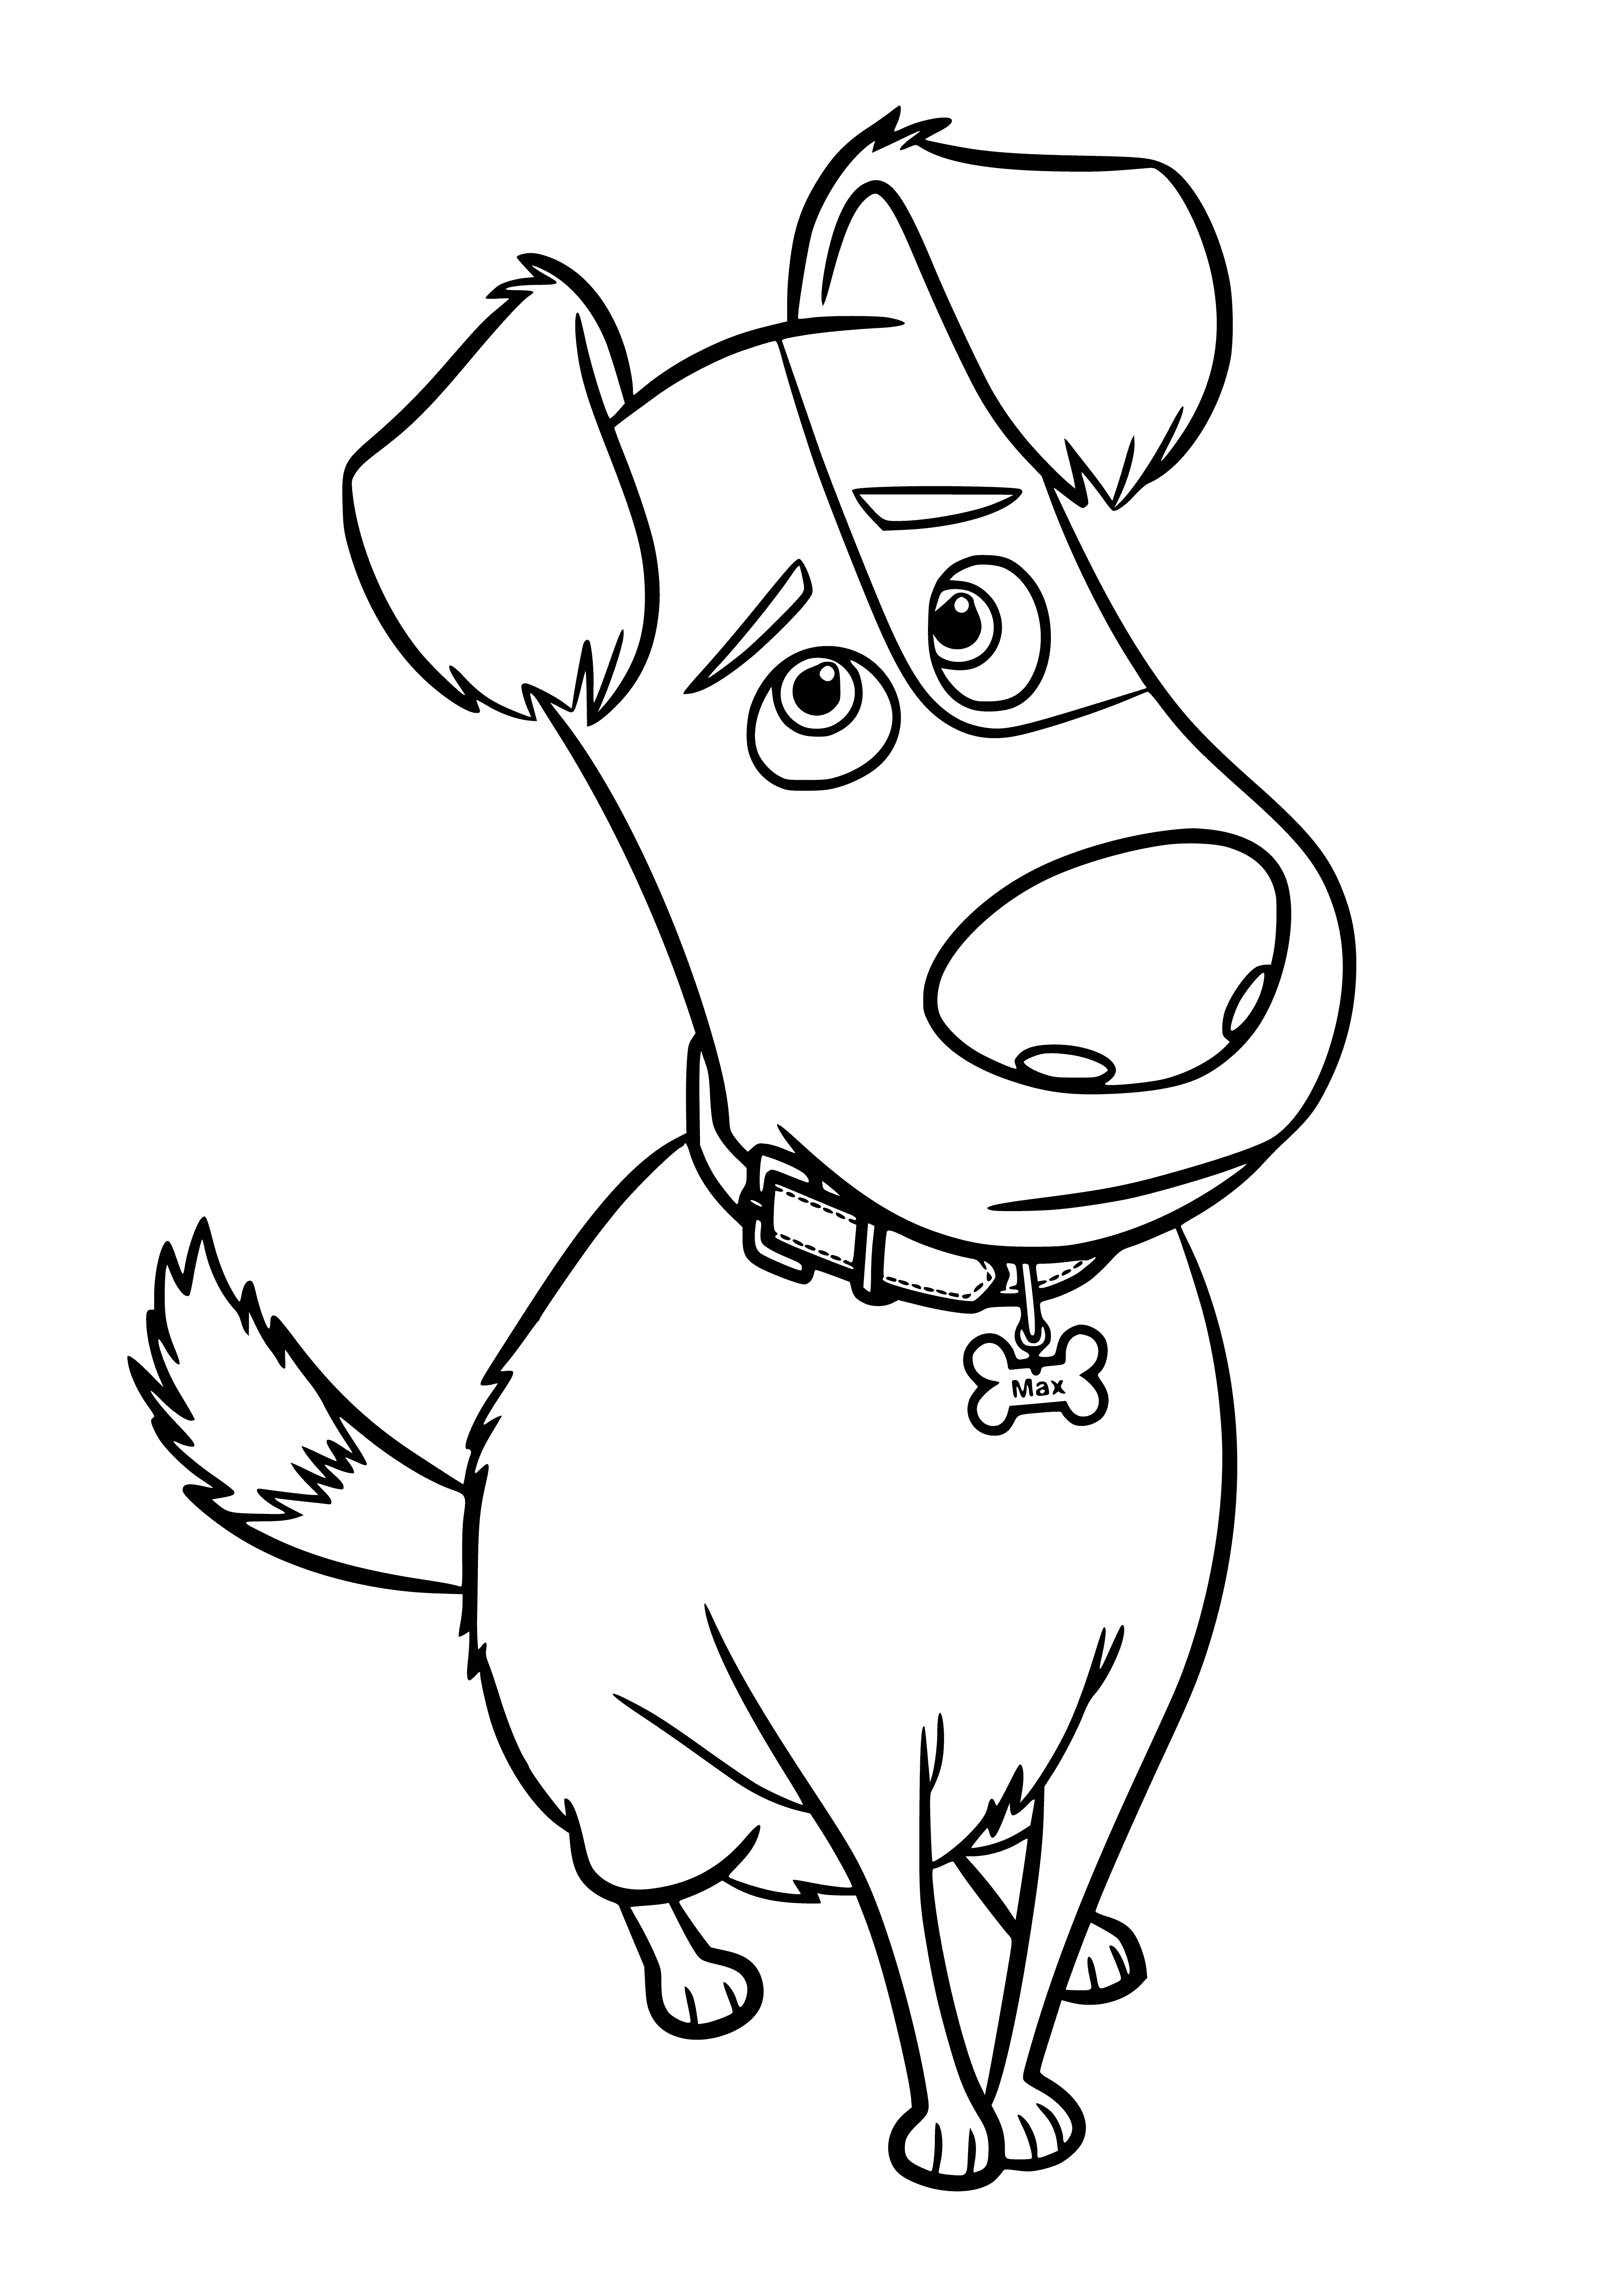 coloring page: Max, a city terrier, loves his life of play, naps & walks. When alone, he embarks on adventures with his friends, but always comes home at the end.